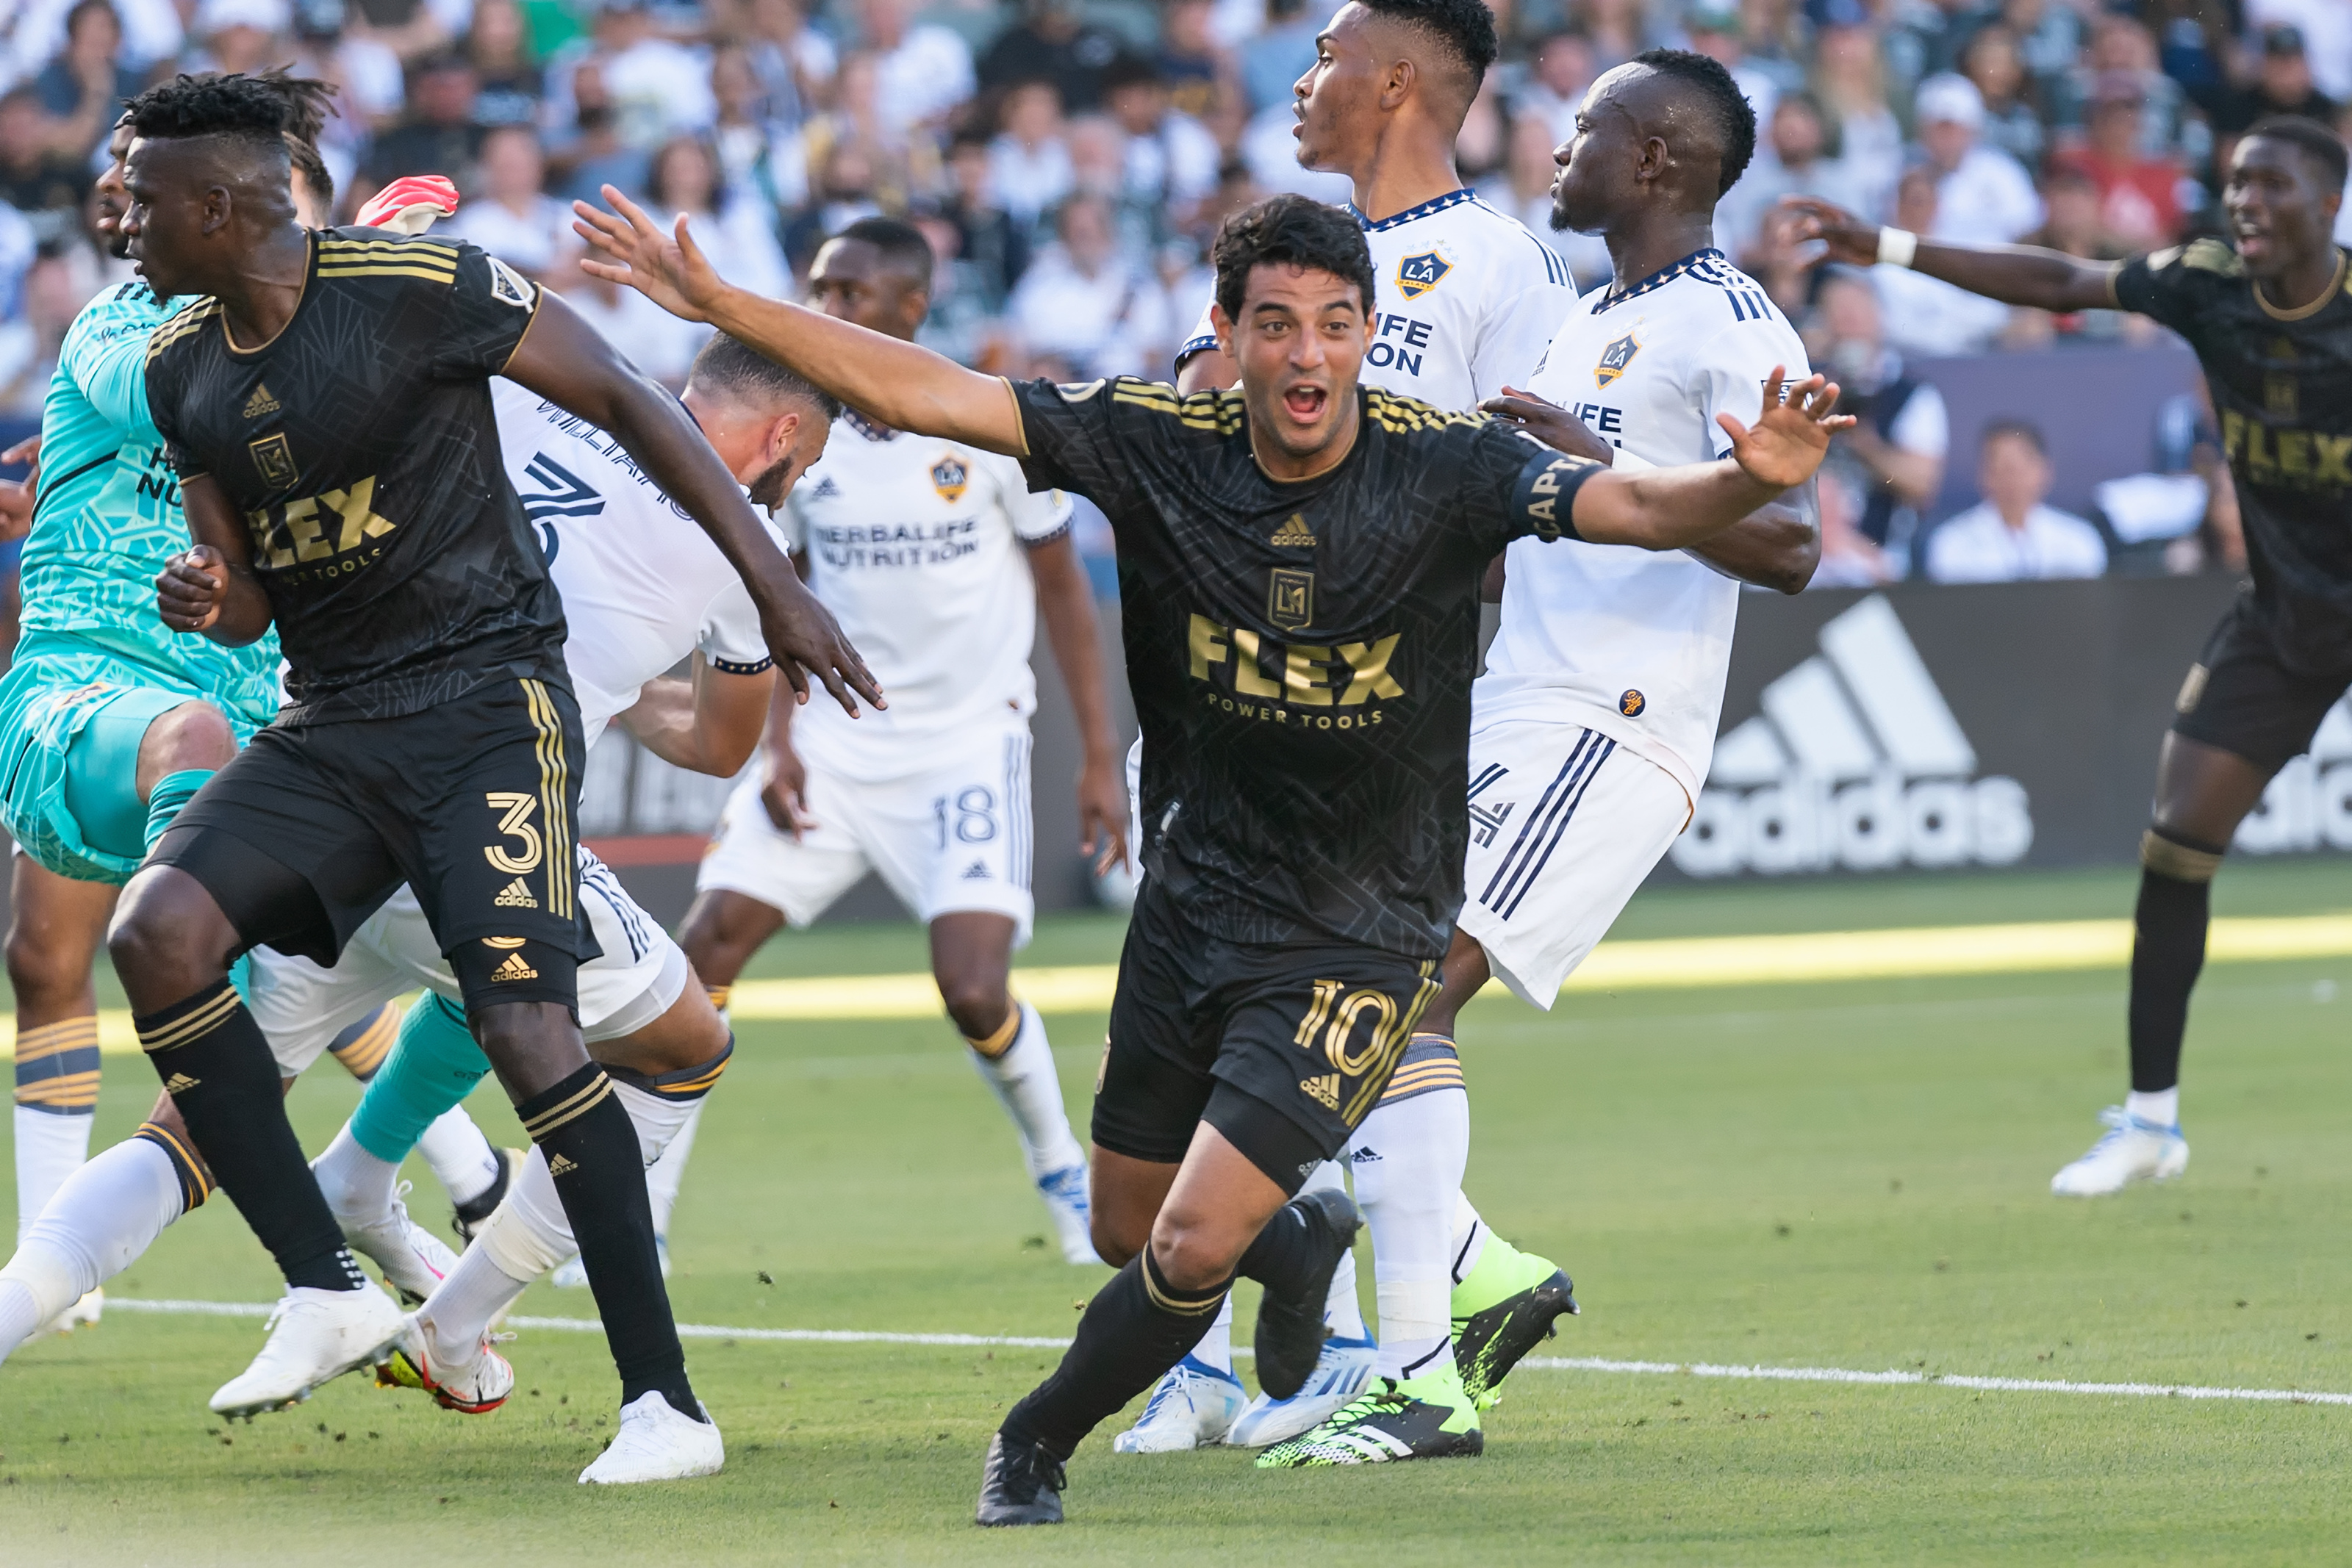 LAFC's Carlos Vela eager for upcoming chance to recharge – Daily News